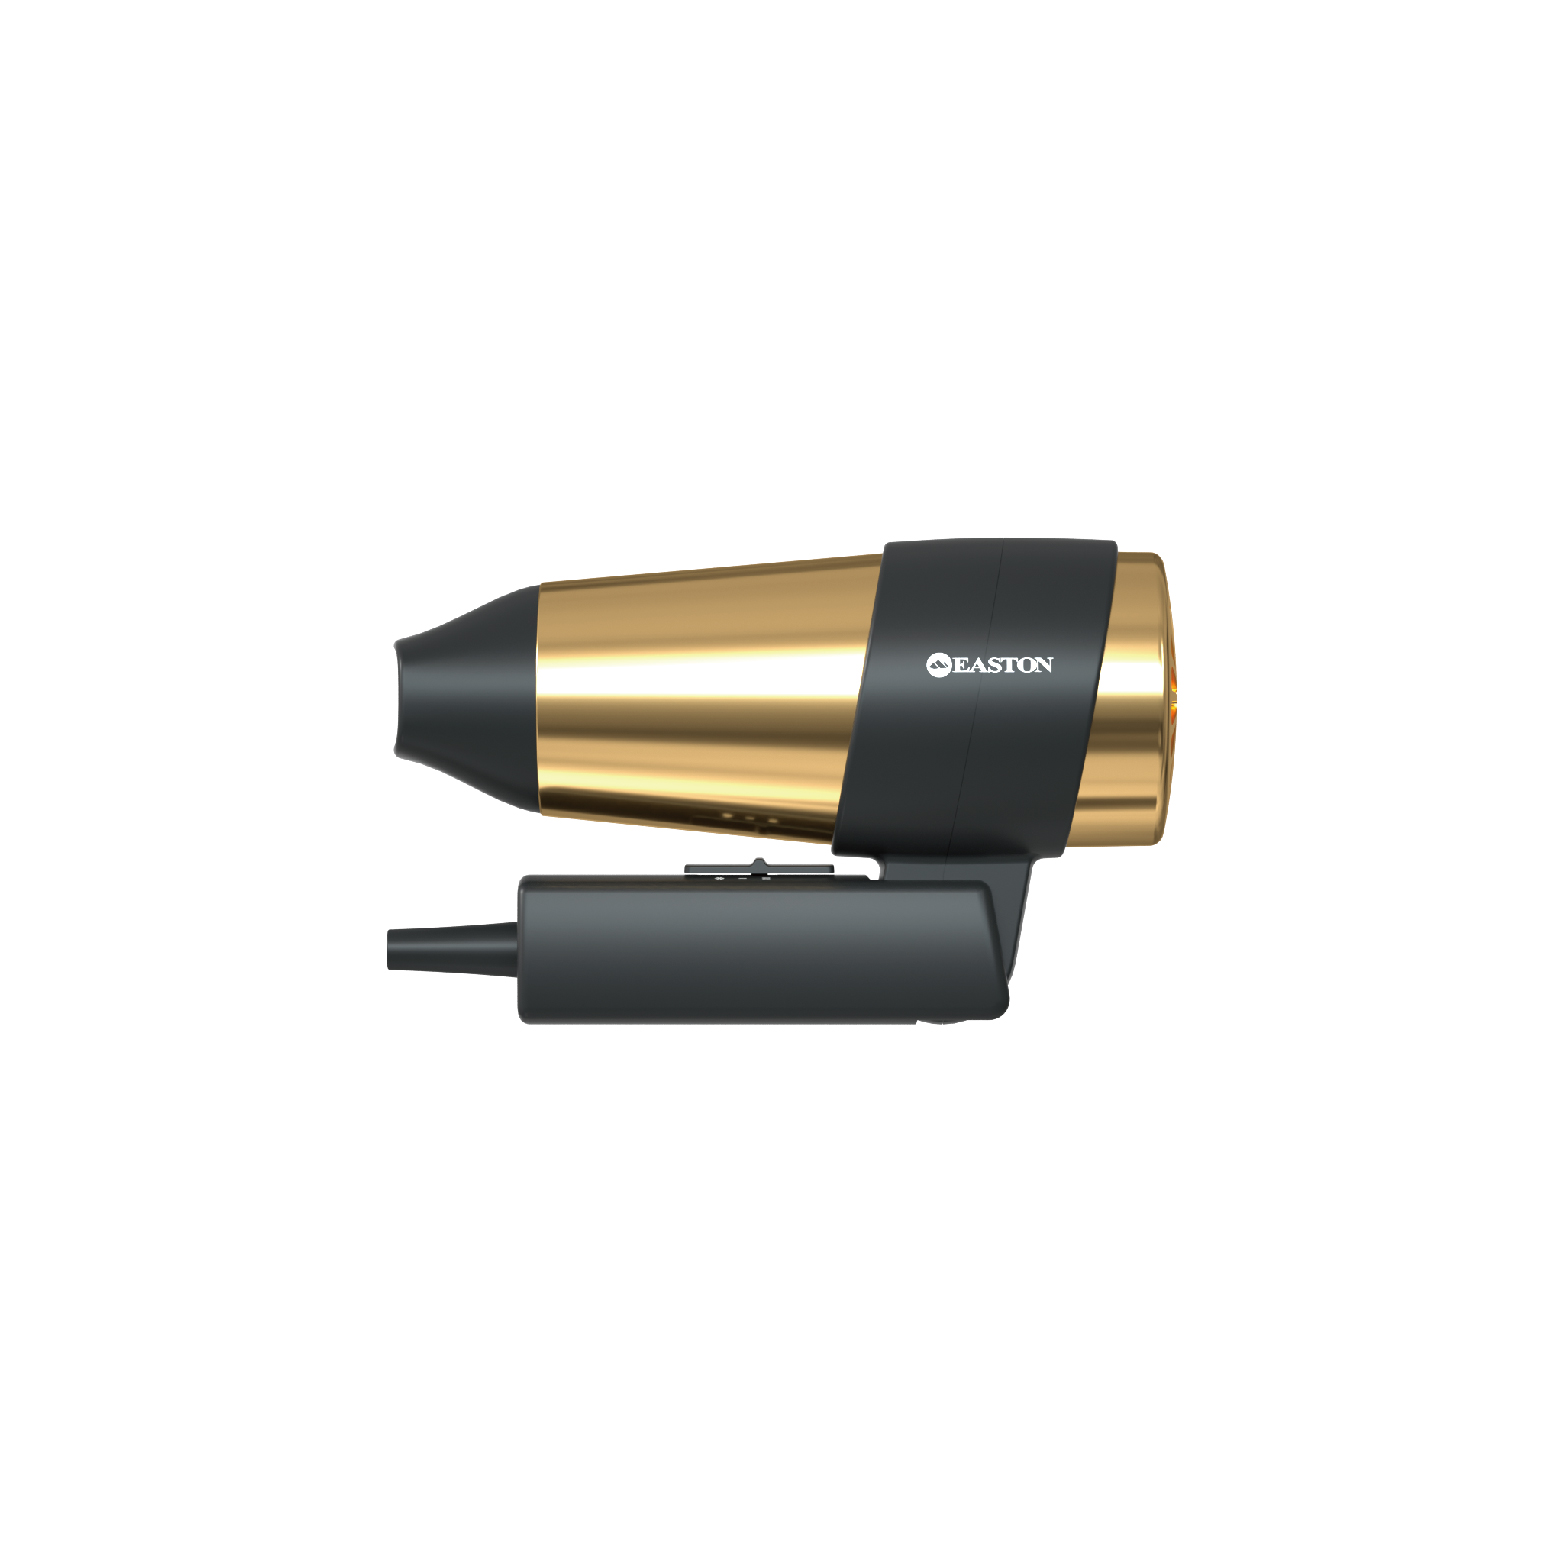 Metal Folding luxury Hotel Hair Dryer Golden from China manufacturer -  Easton Hotel Supplies Co.,Ltd.